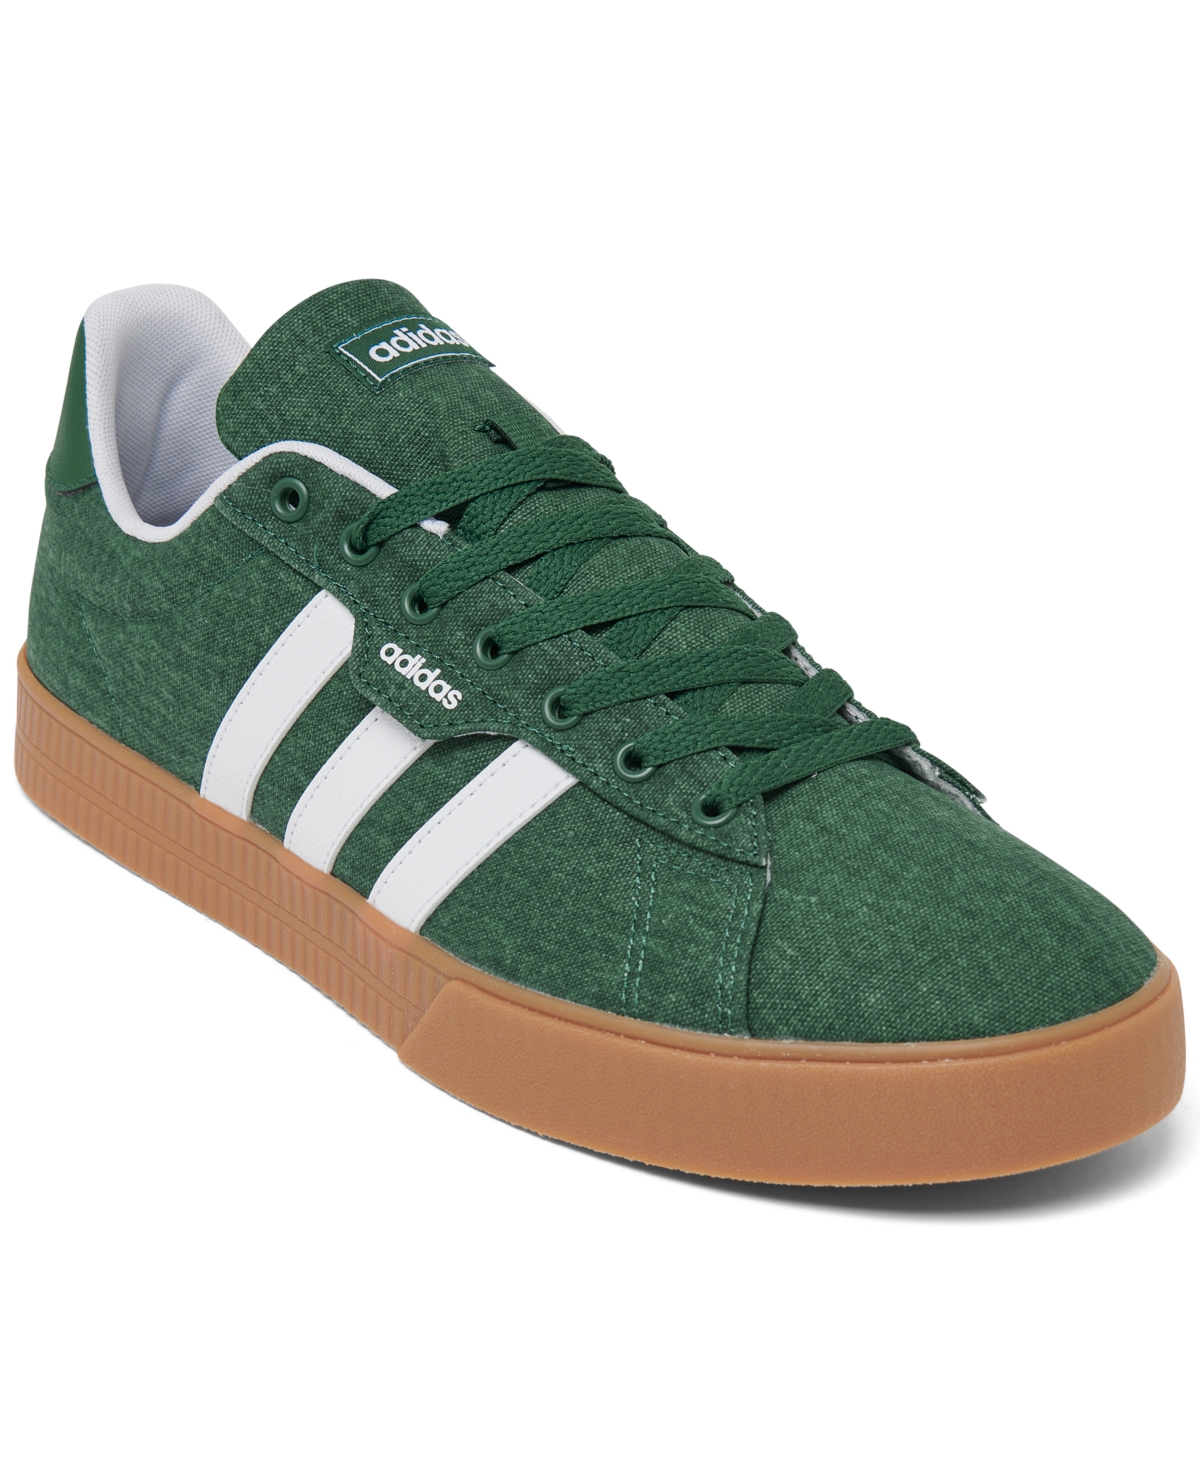 ADIDAS ORIGINALS MEN'S DAILY 3.0 CASUAL SNEAKERS FROM FINISH LINE